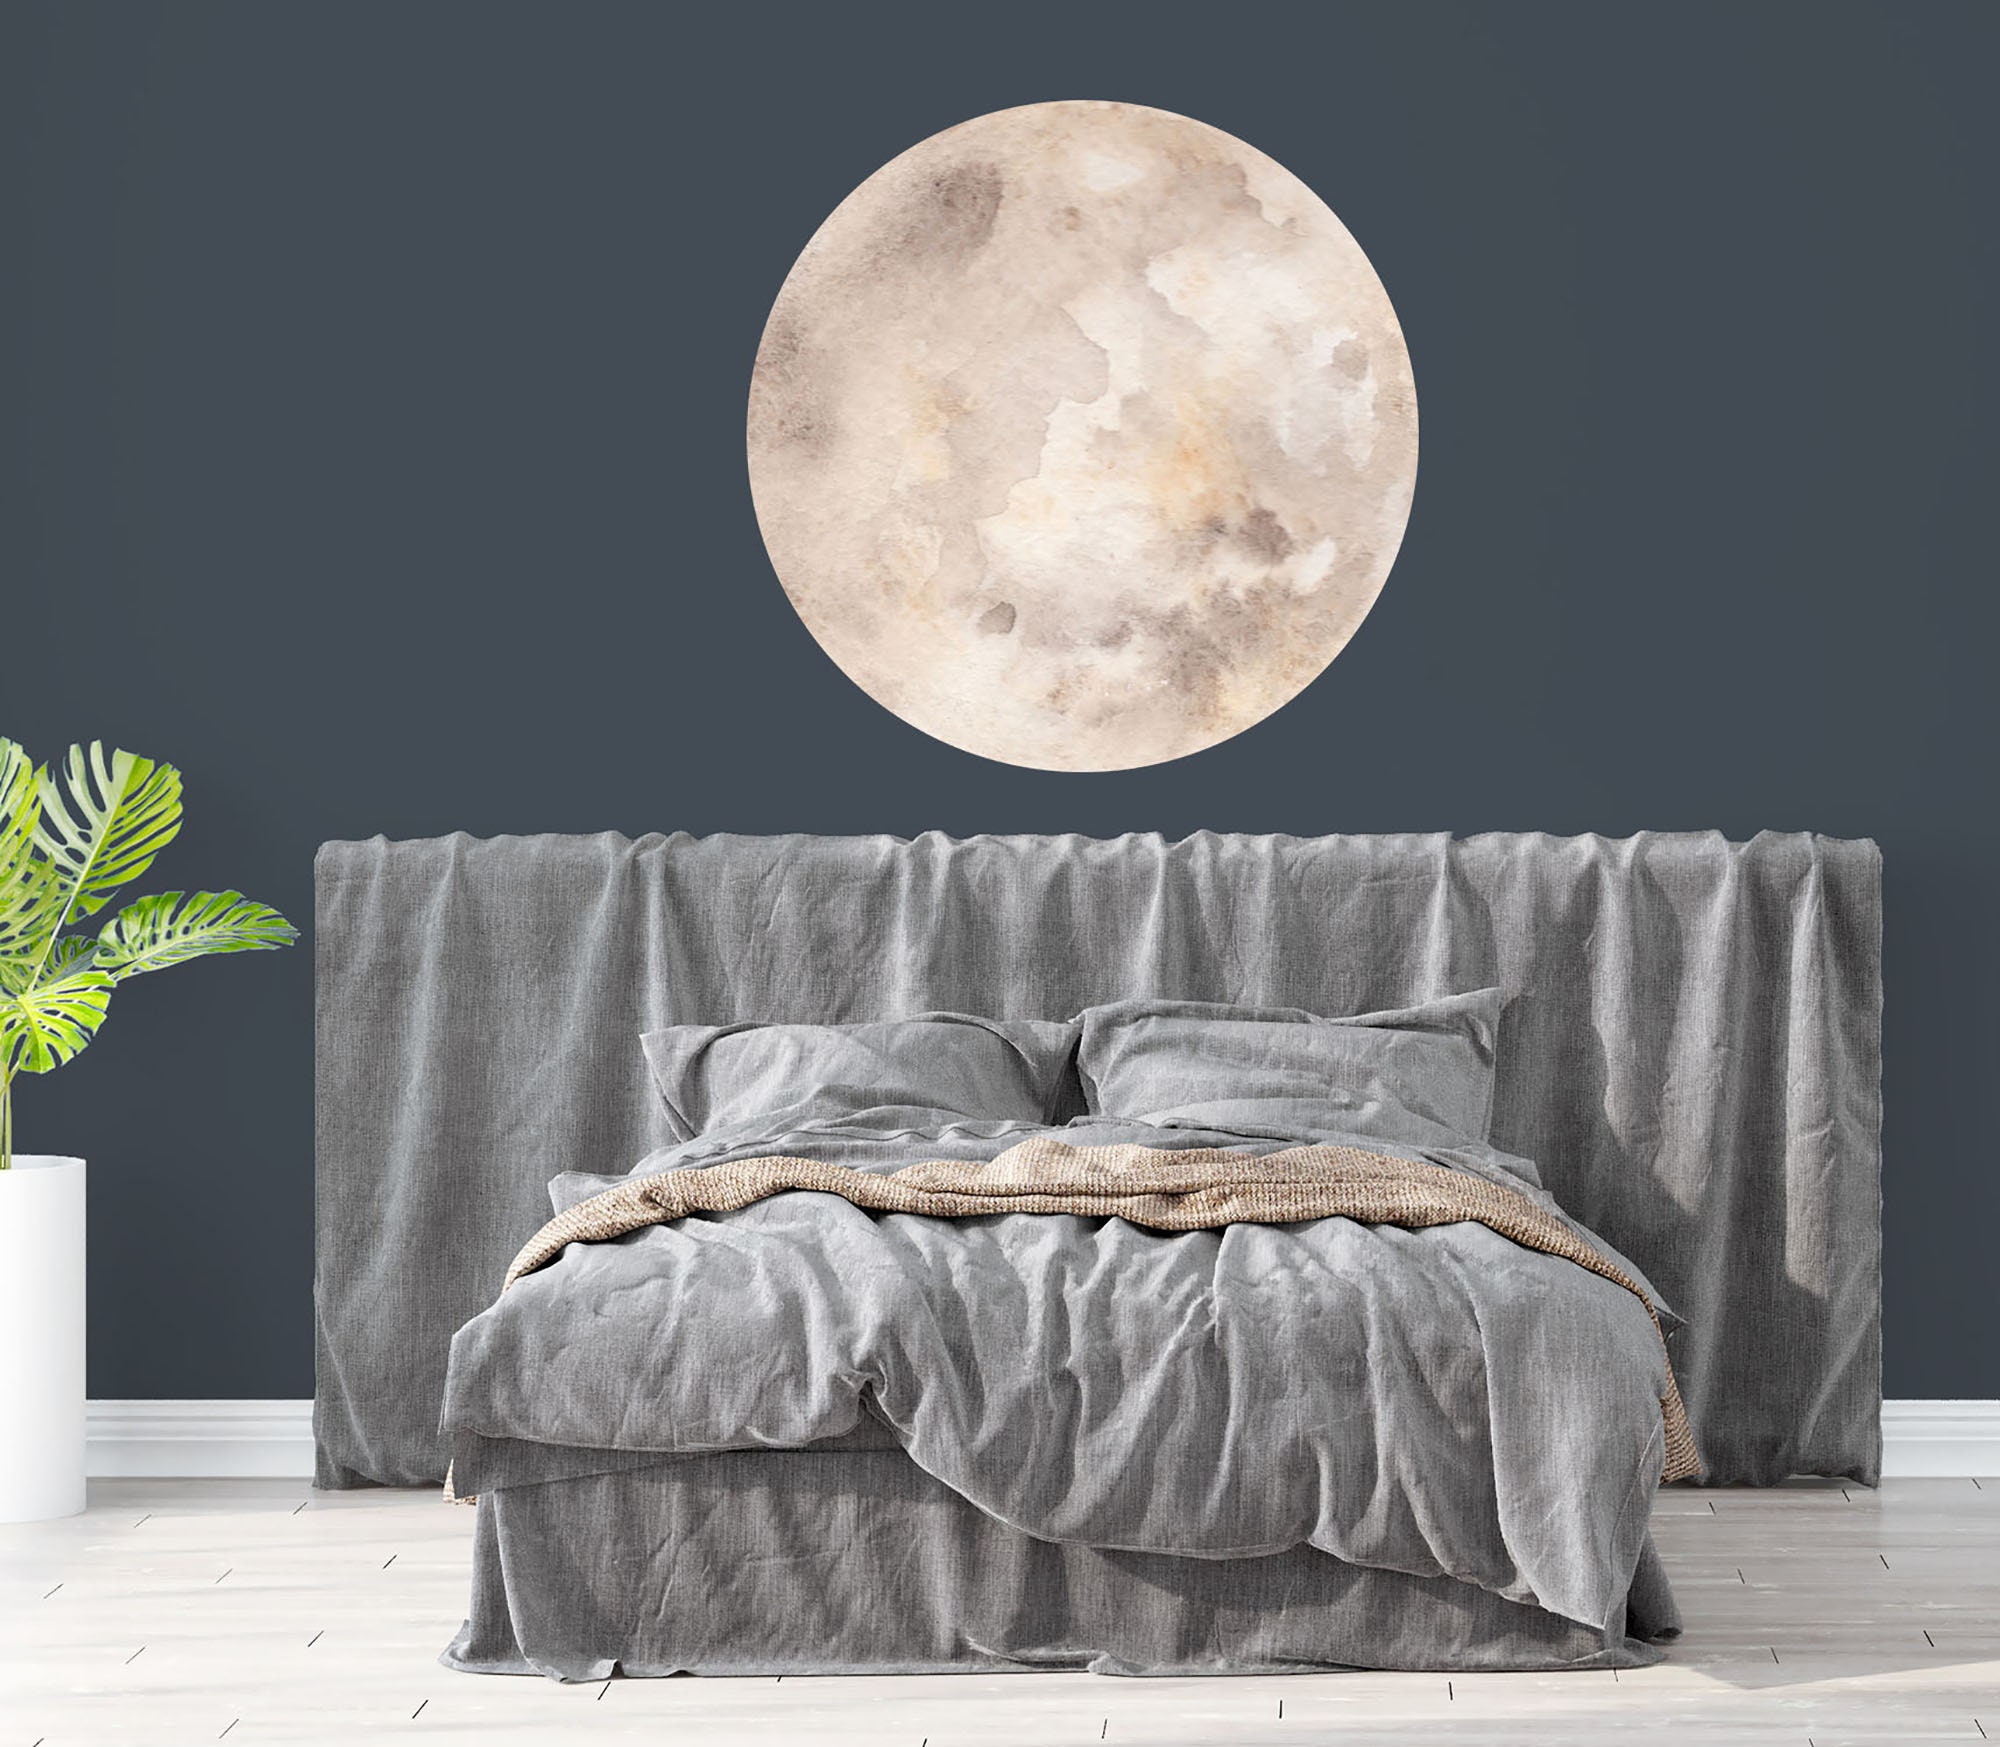 3D Moon Wall Decal. Stickers. Room NS2087 Nursery Kids Decor. Wall Decals. Etsy Realistic Nursery Mural Themed Wall - Space Watercolor Moon Moon